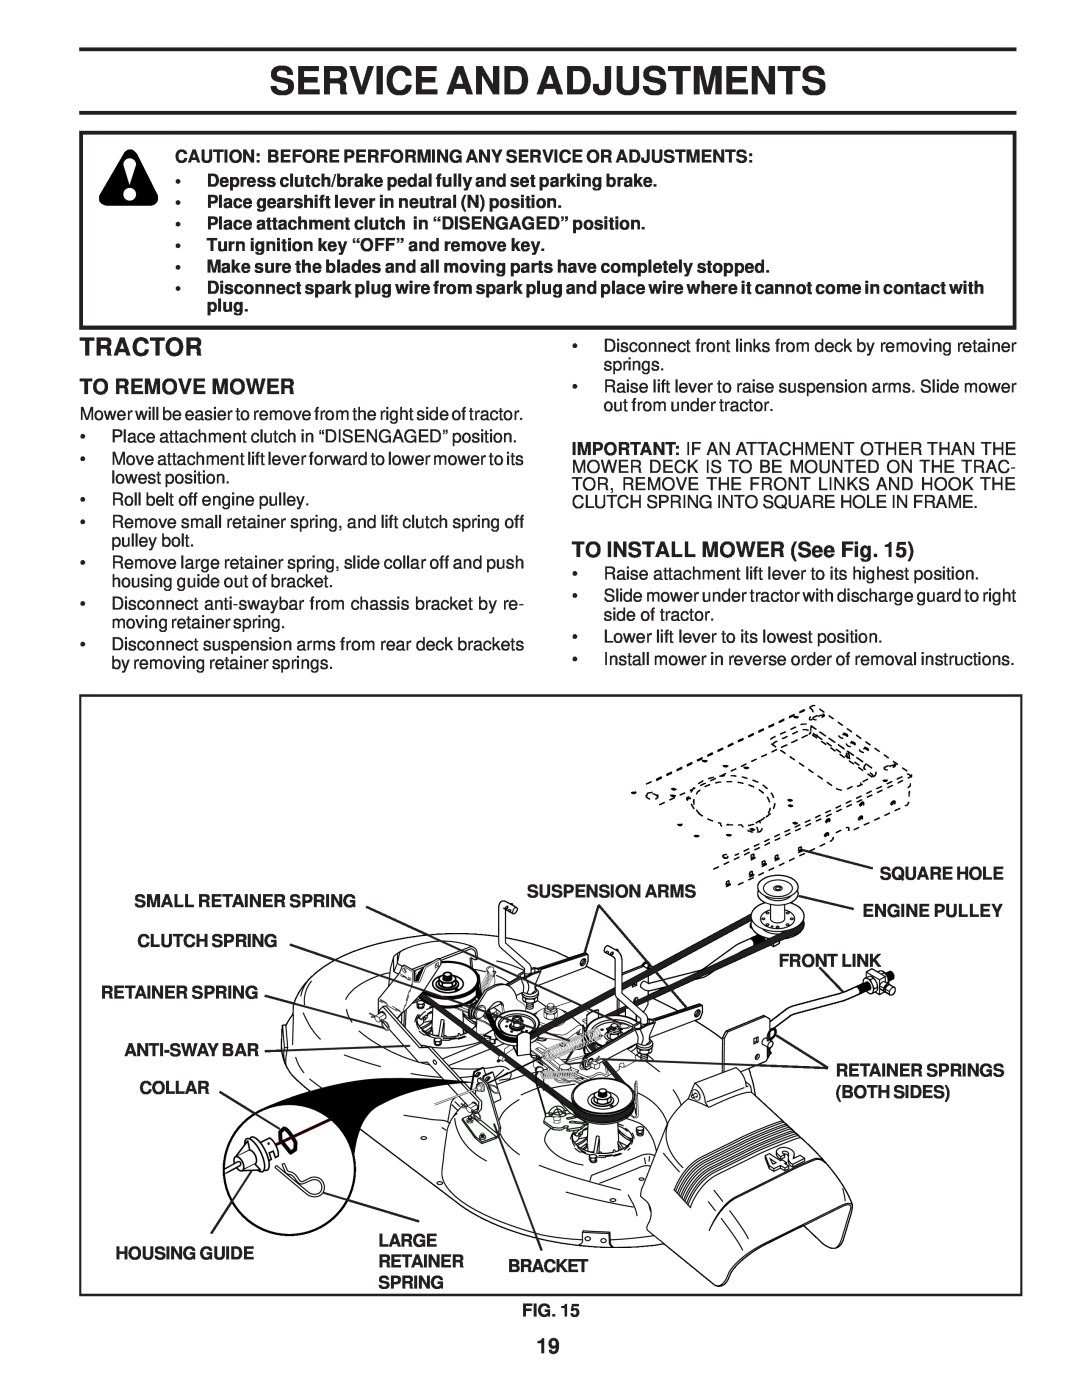 Weed Eater 174193, WE12542F owner manual Service And Adjustments, To Remove Mower, TO INSTALL MOWER See Fig, Tractor 